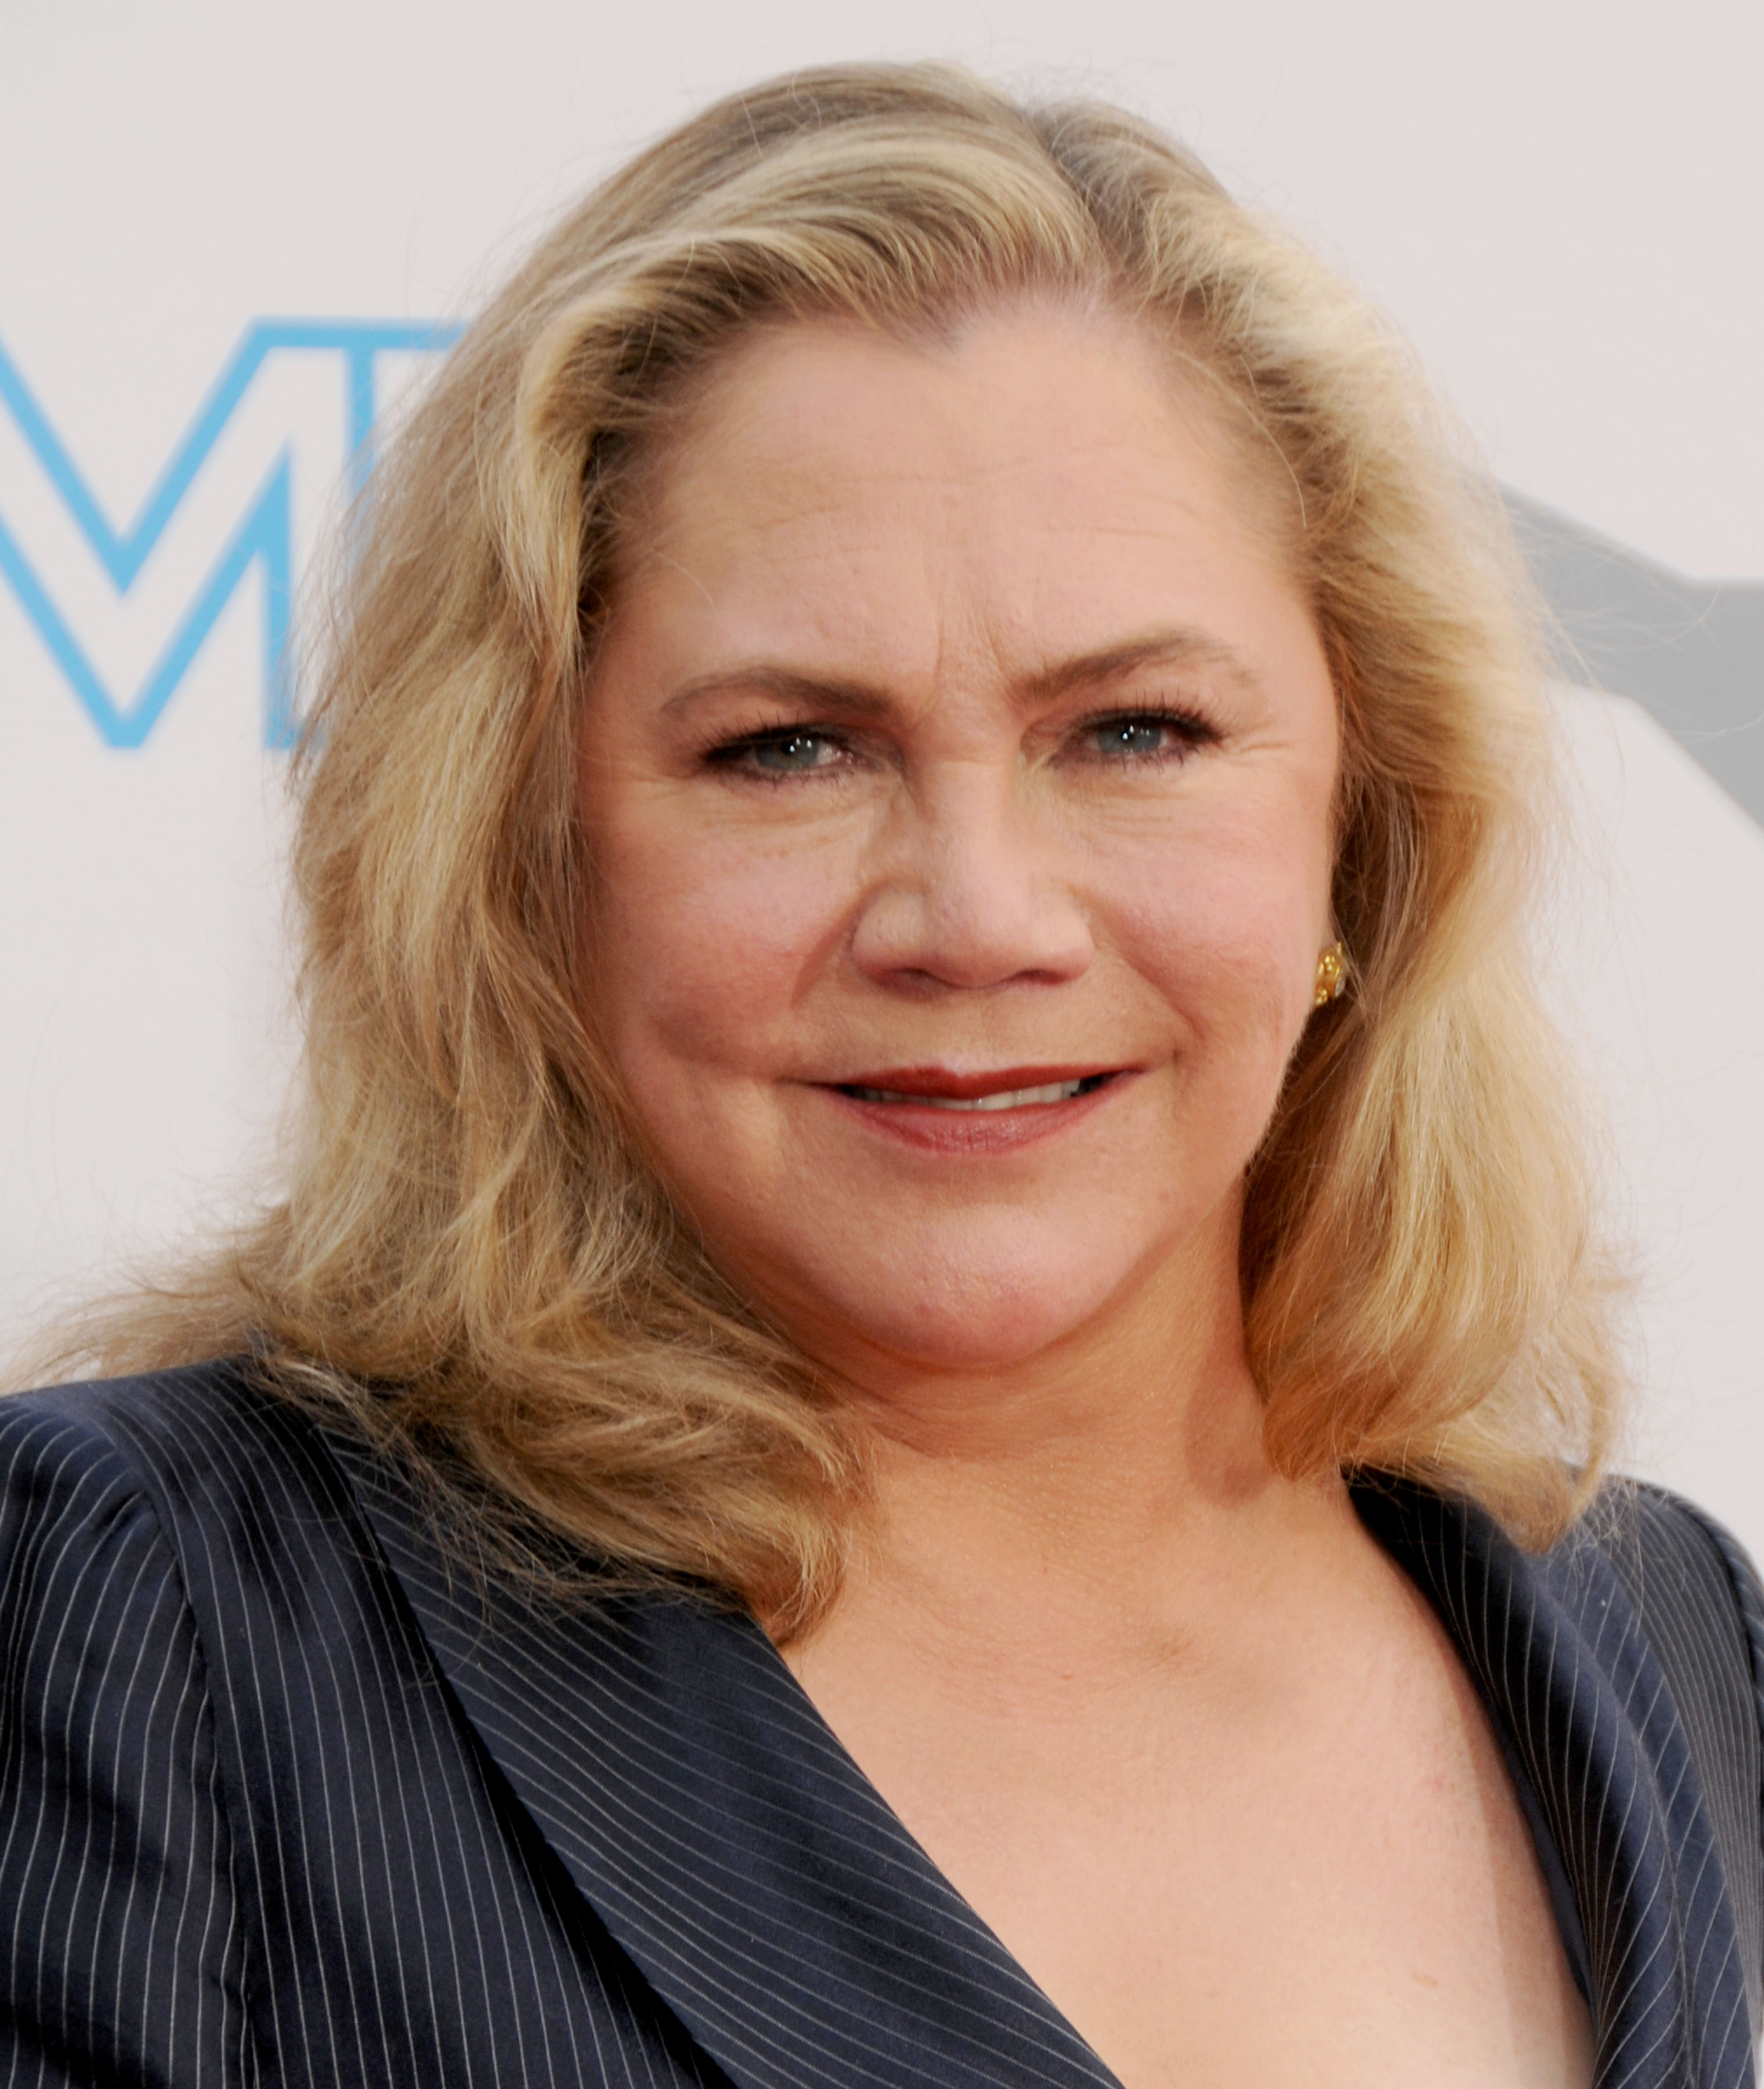 Kathleen Turner attends the "37th AFI Life Achievement Award: A Tribute to Michael Douglas", held at Sony Pictures Studios in Culver City, California on June 11, 2009. | Source: Getty Images